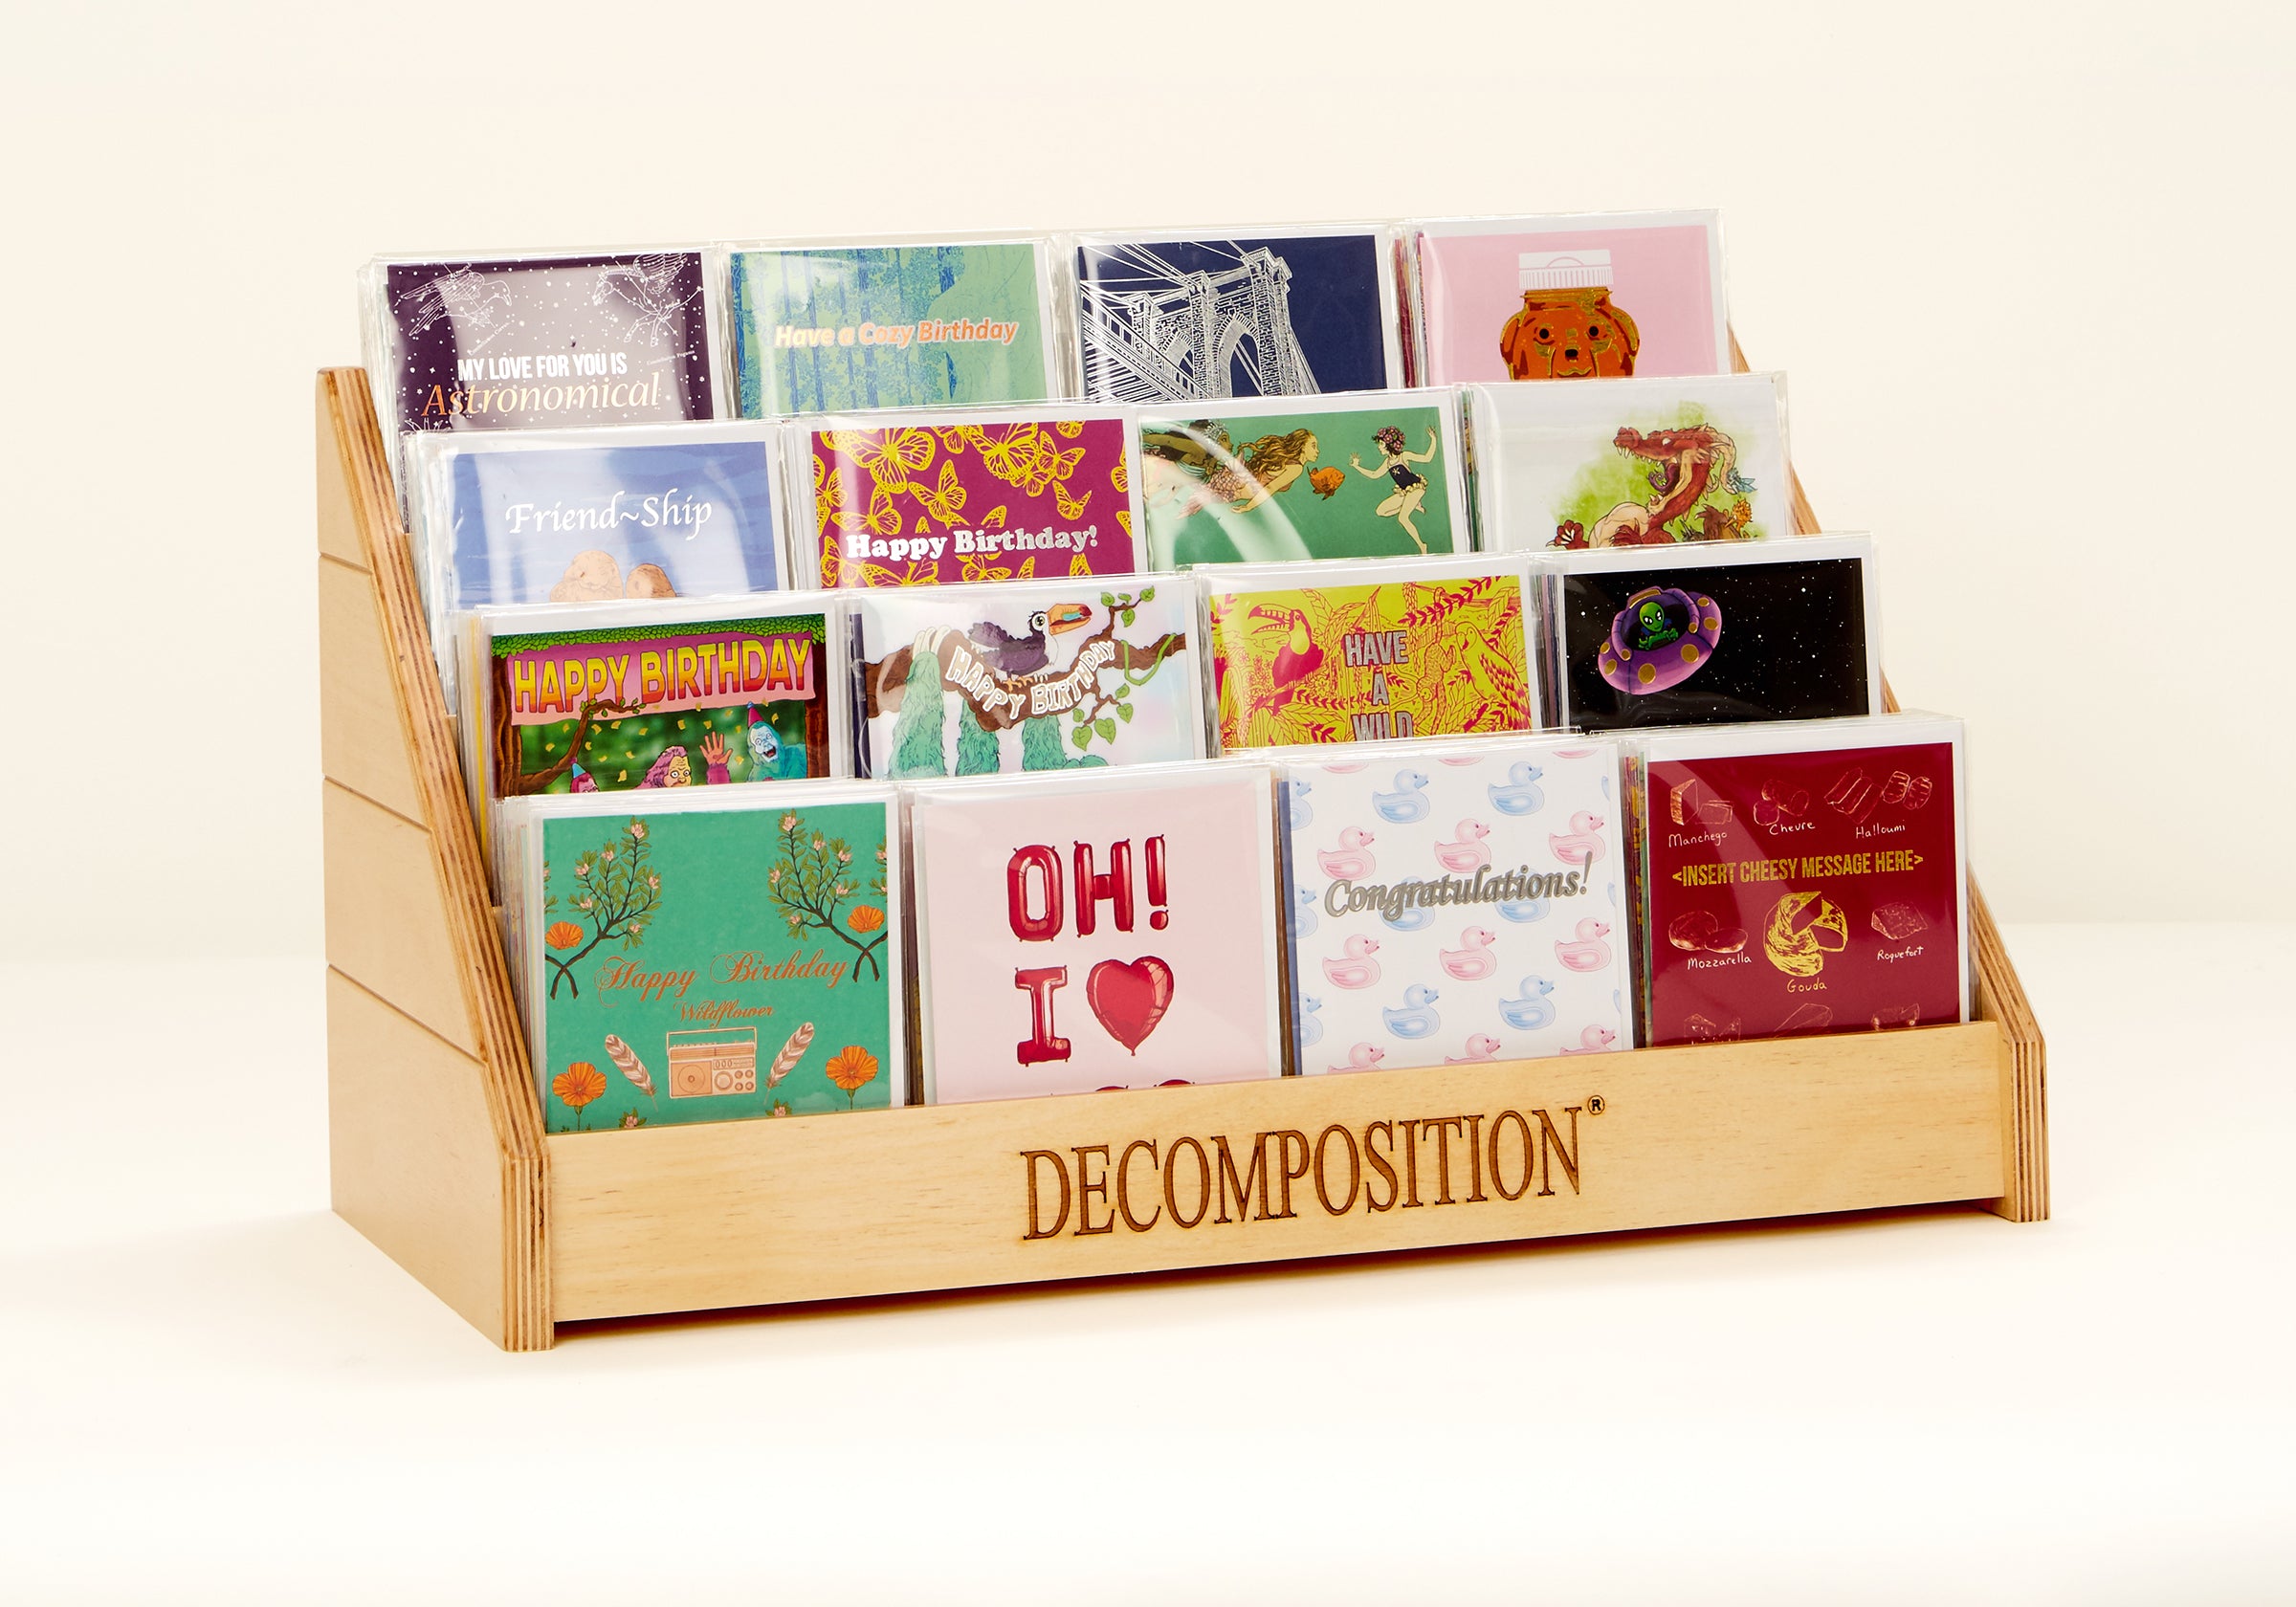 Card Rack for Decomposition Cards